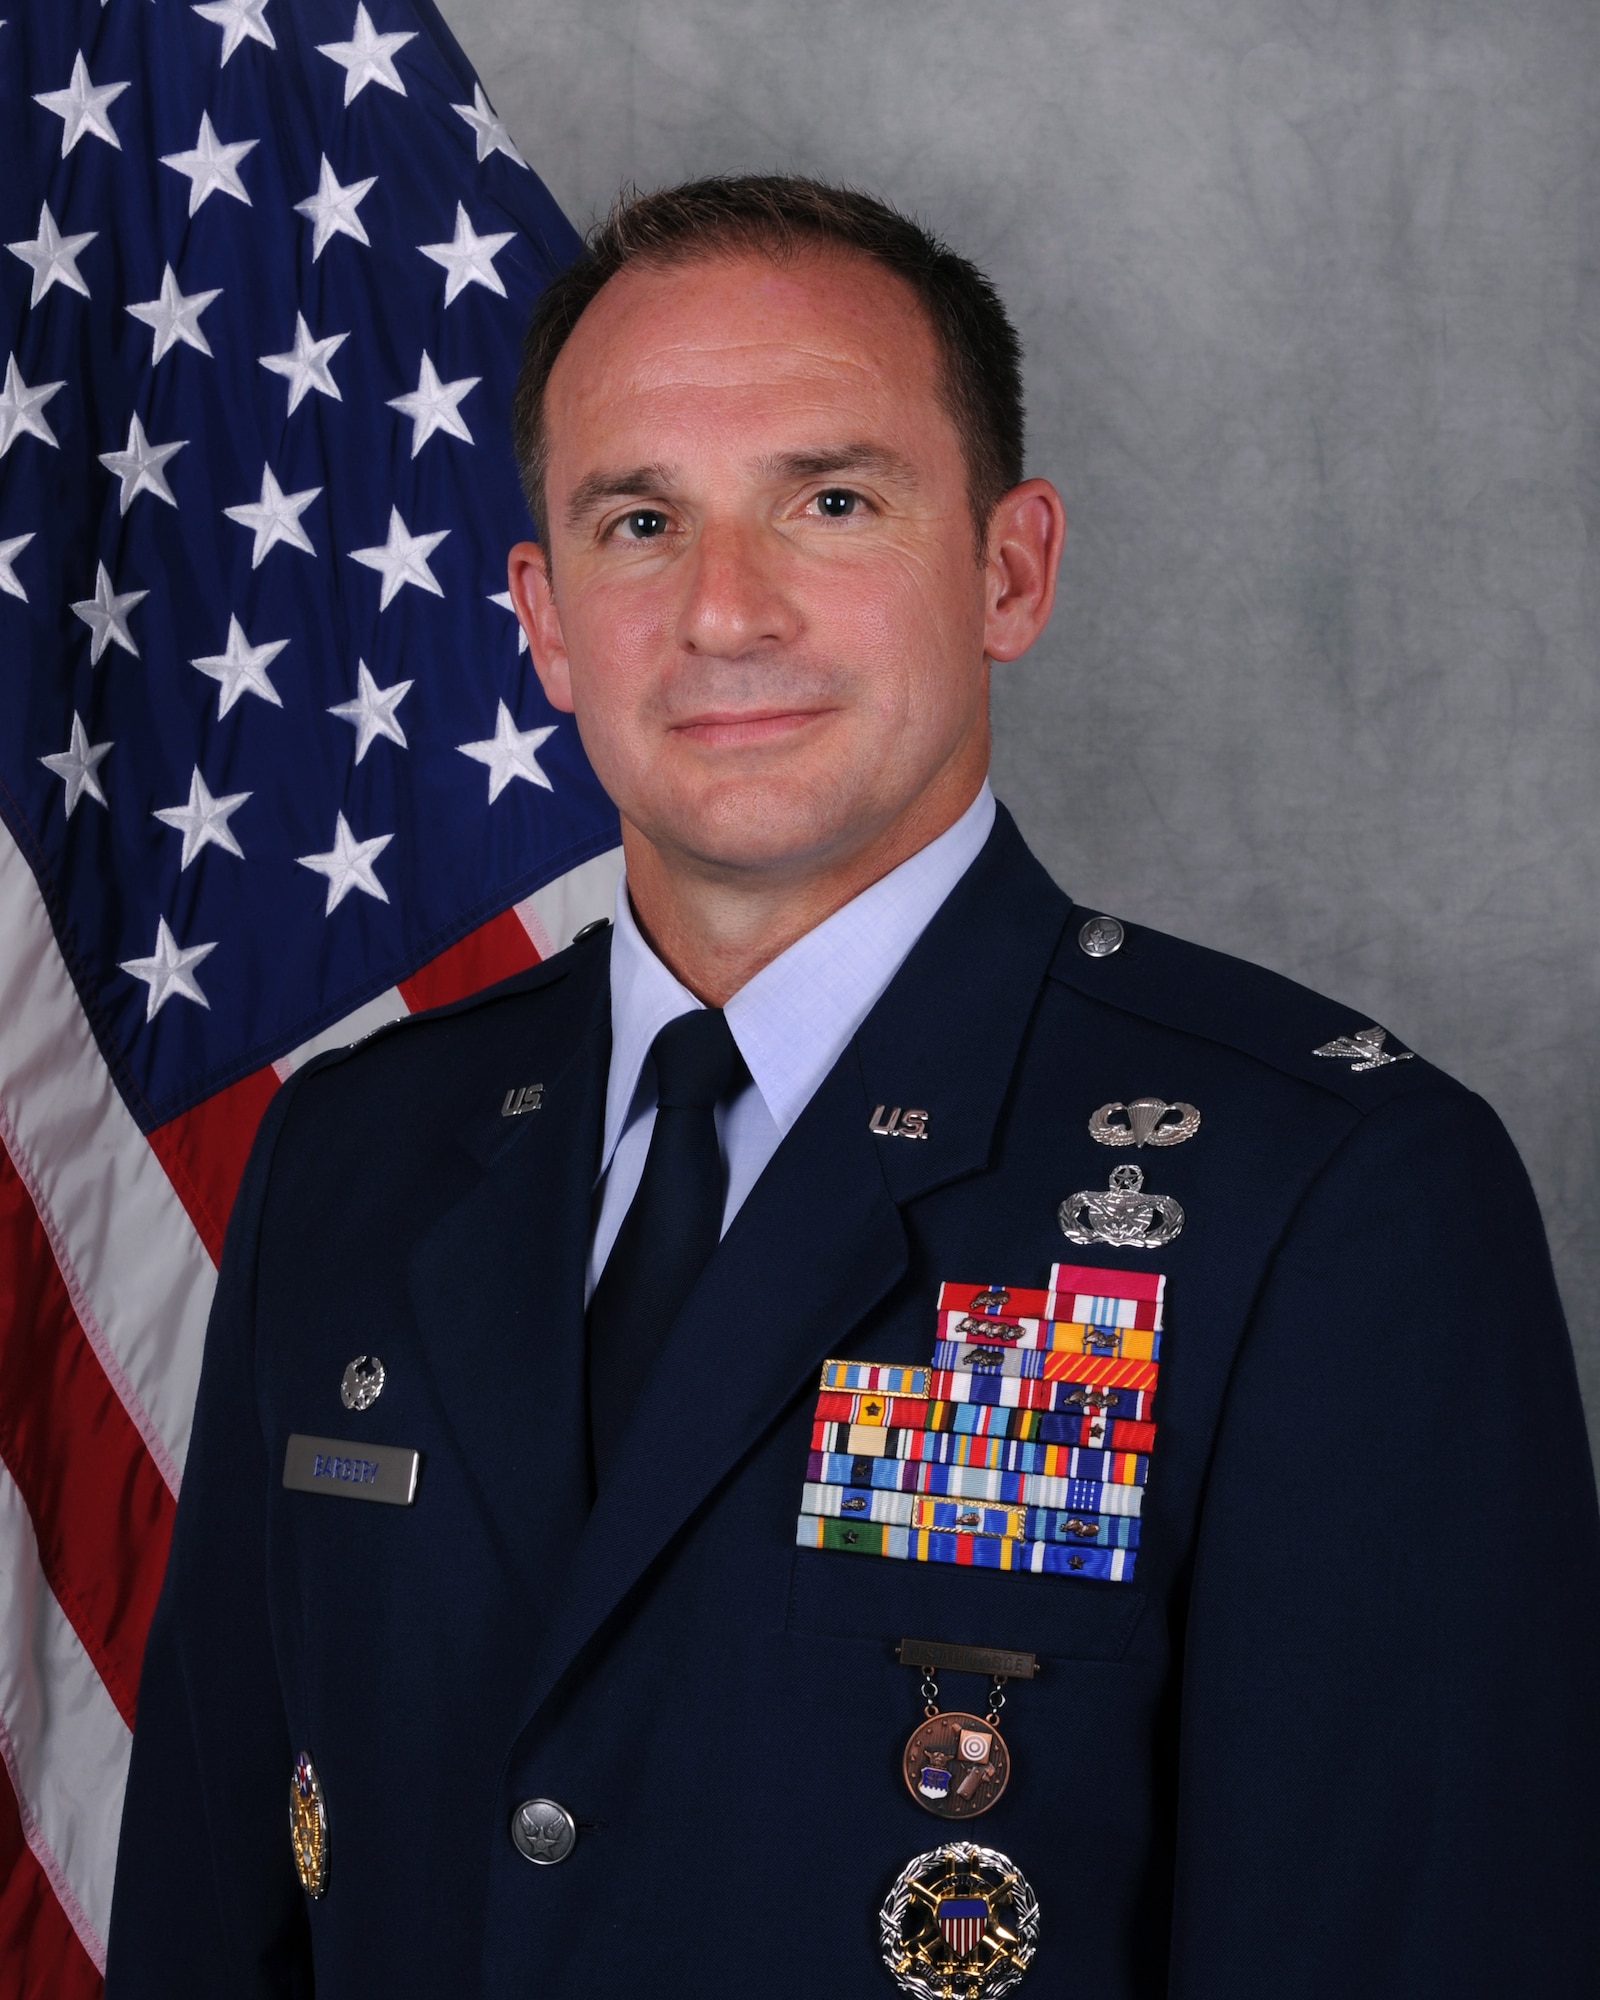 Col. Chris Bargery, 65th Air Base Wing commander, Lajes Field, Azores, Portugal